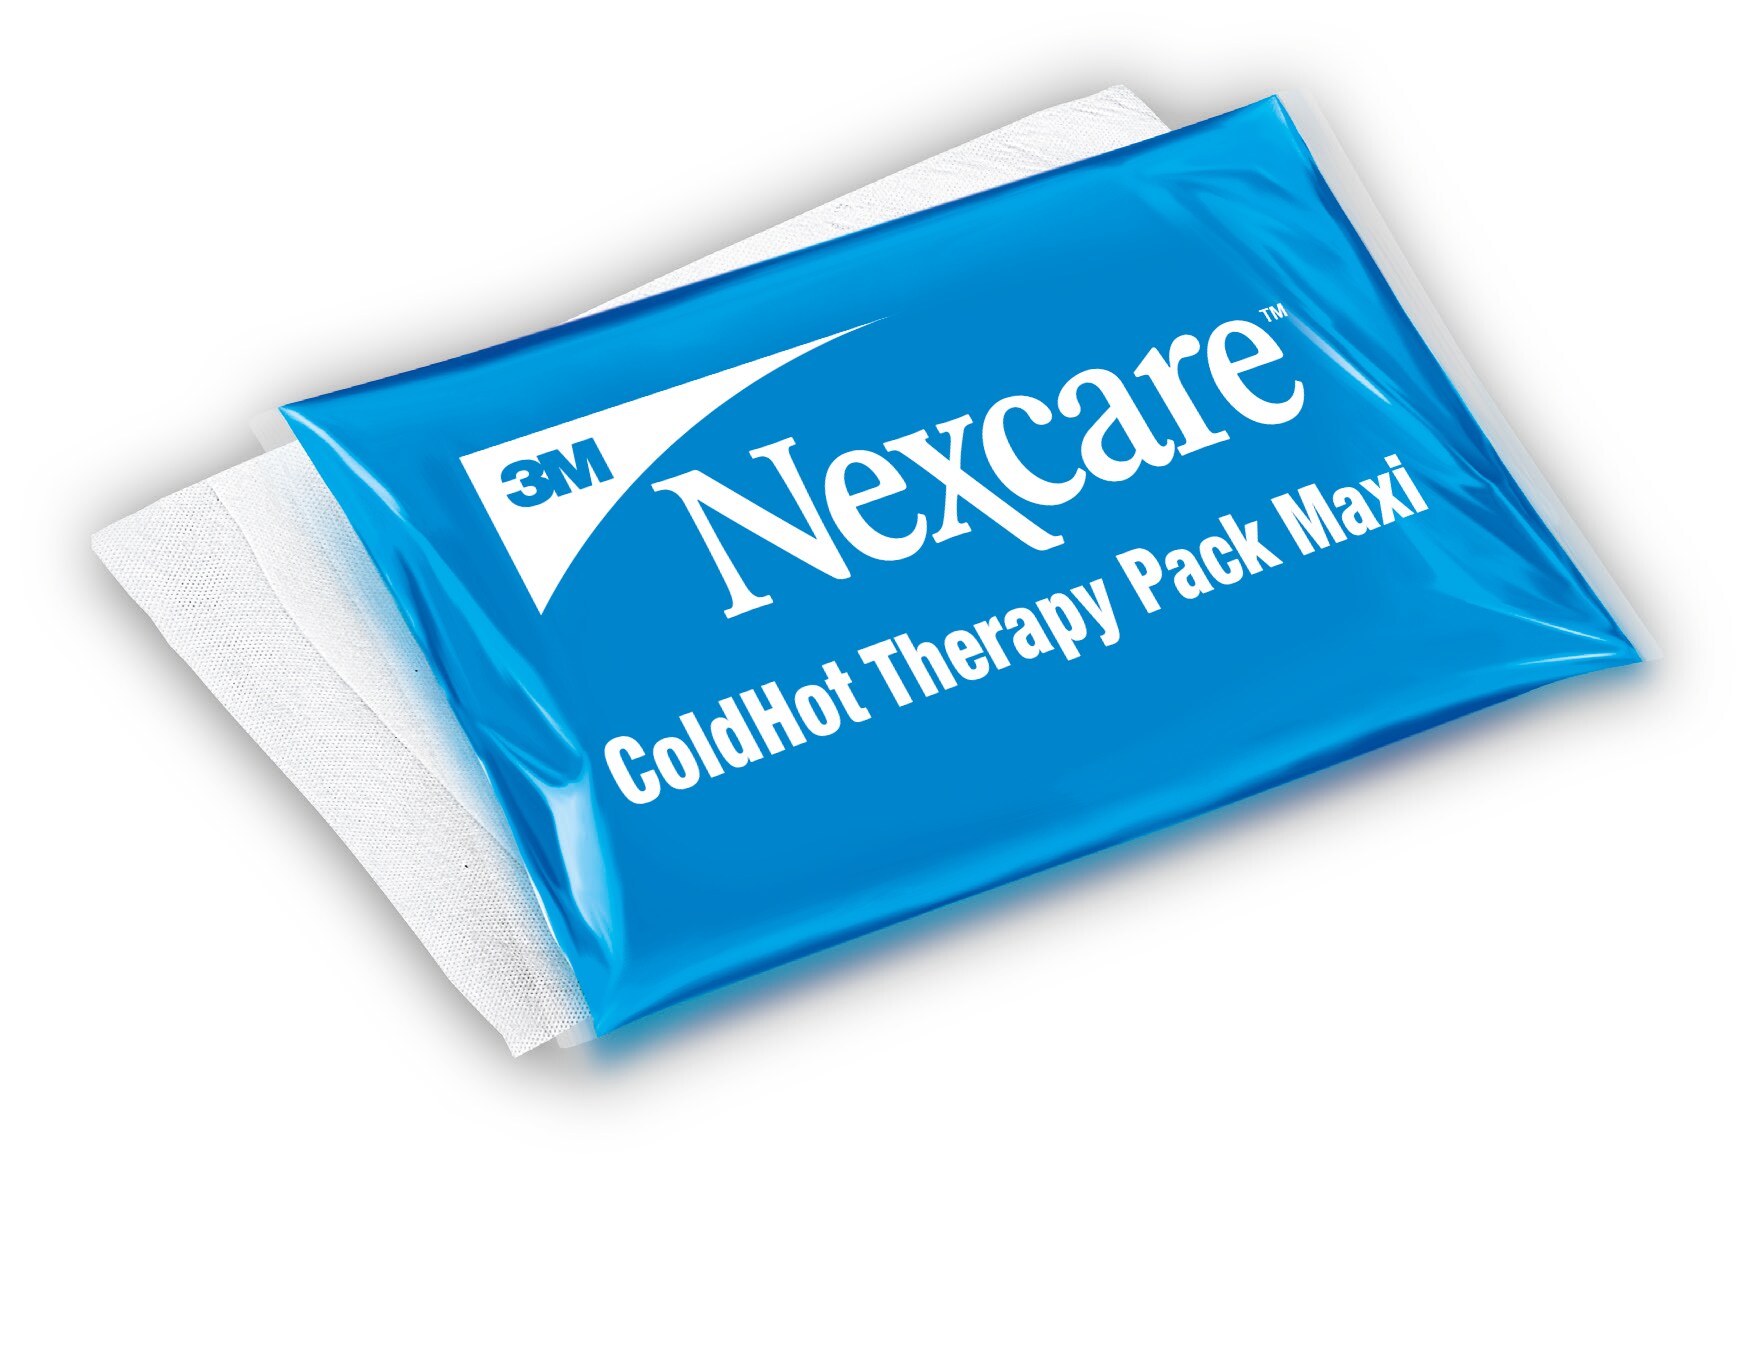 Nexcare™ cold/hot pack - 19,5 x 30 cm - 1 st